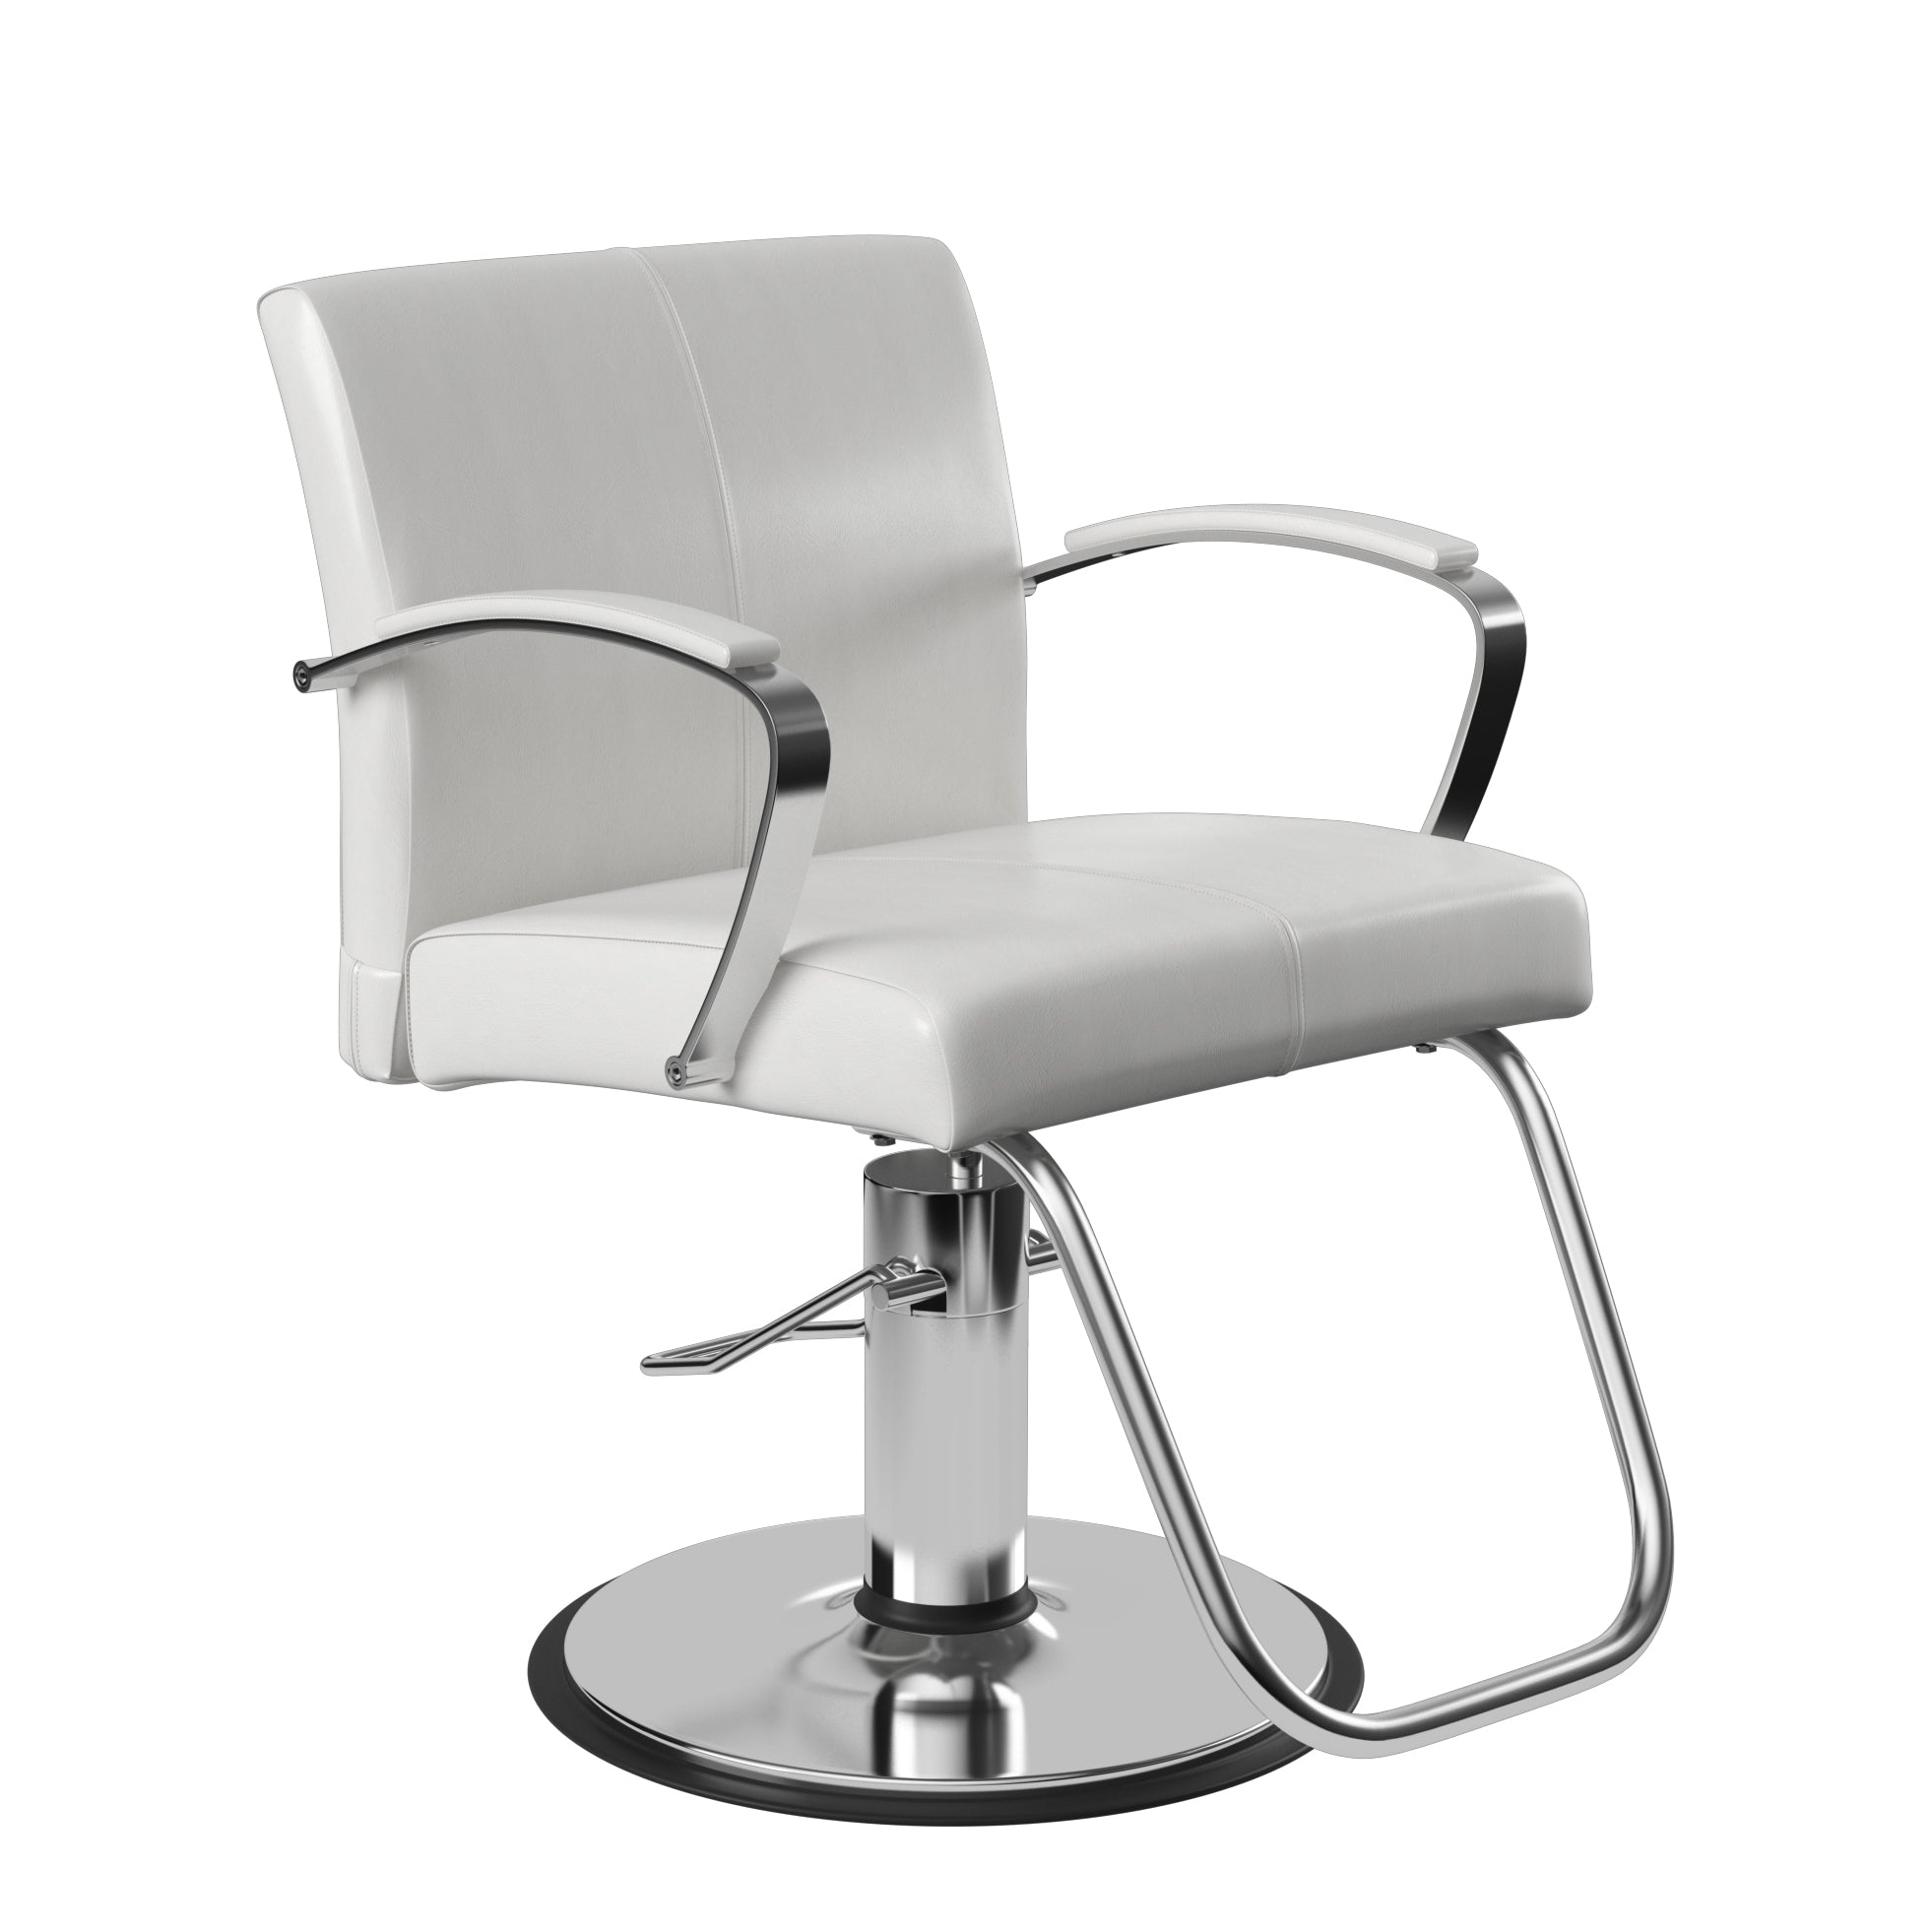 Mallory Plush Styling Chair - Collins - Salon Equipment and Barber Equipment